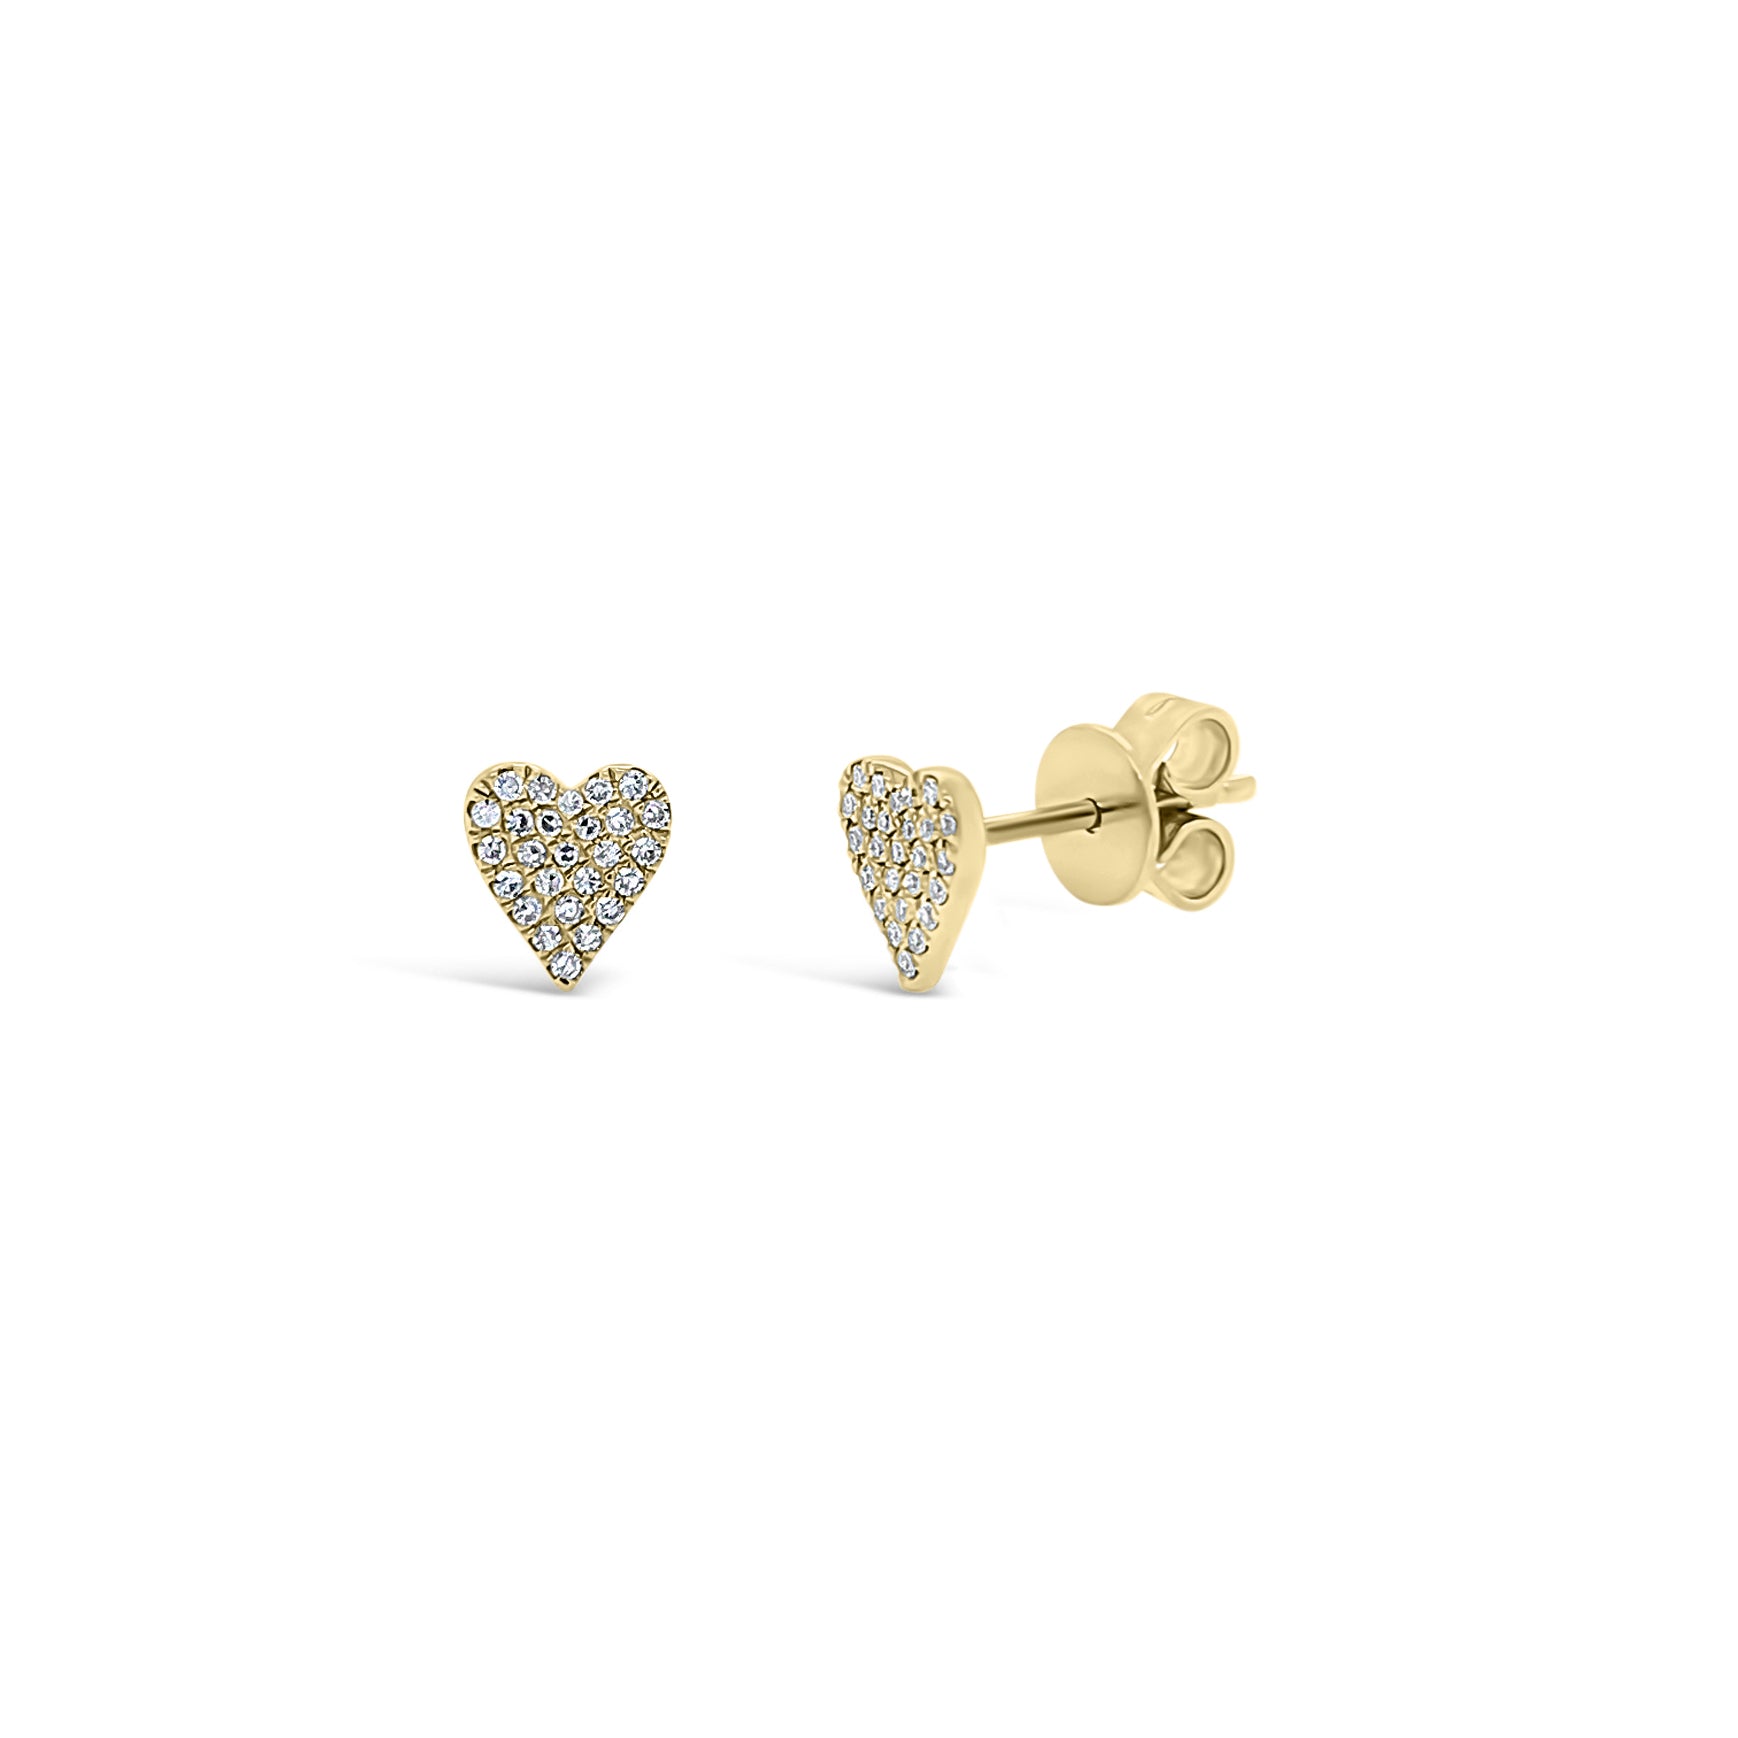 Pave Diamond Heart Stud Earrings - 14K yellow gold weighing 1.04 grams - 52 round diamonds totaling 0.12 carats.